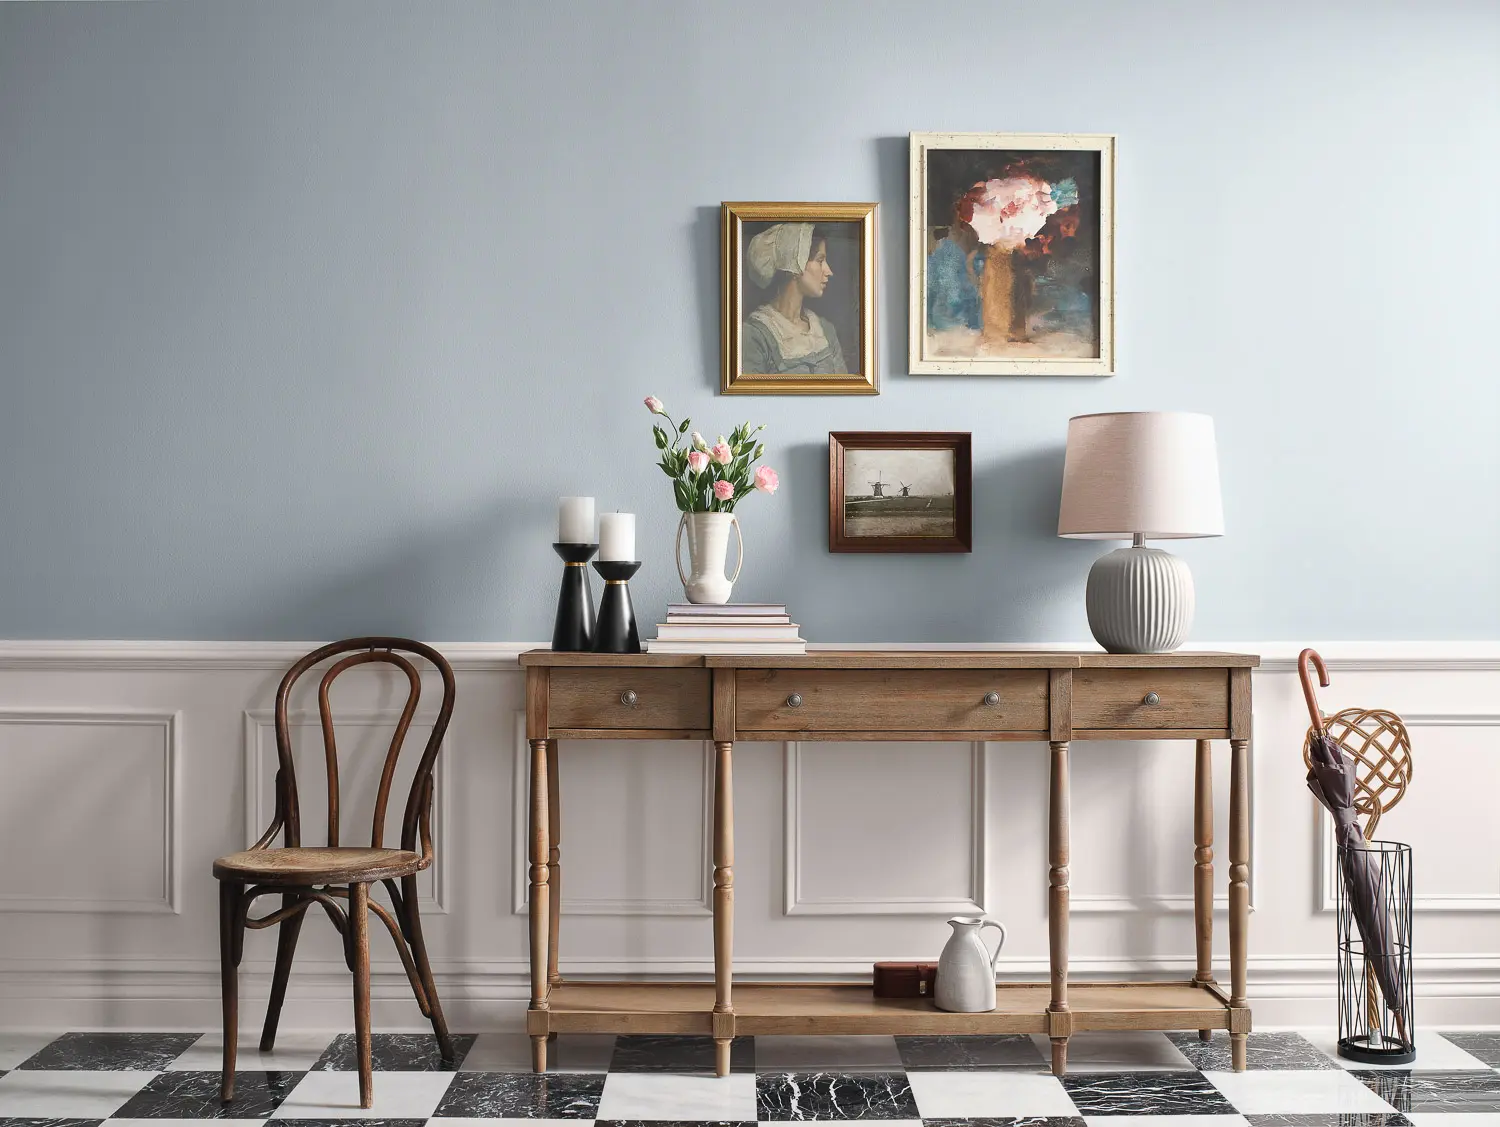 European Country style hallway table with art and a chair